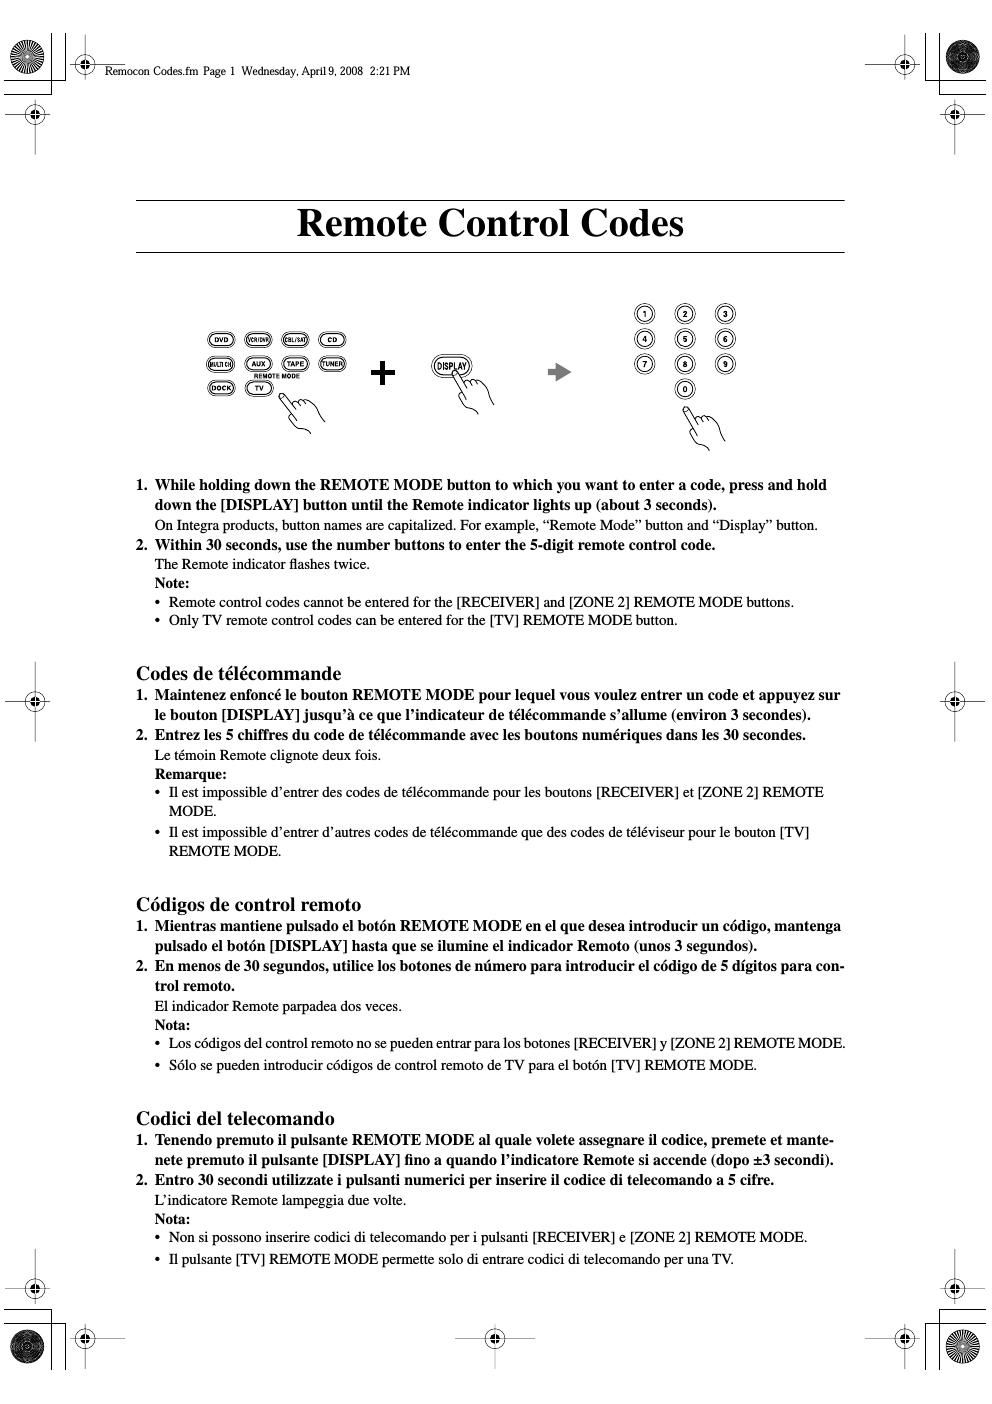 integra remote codes owners manual